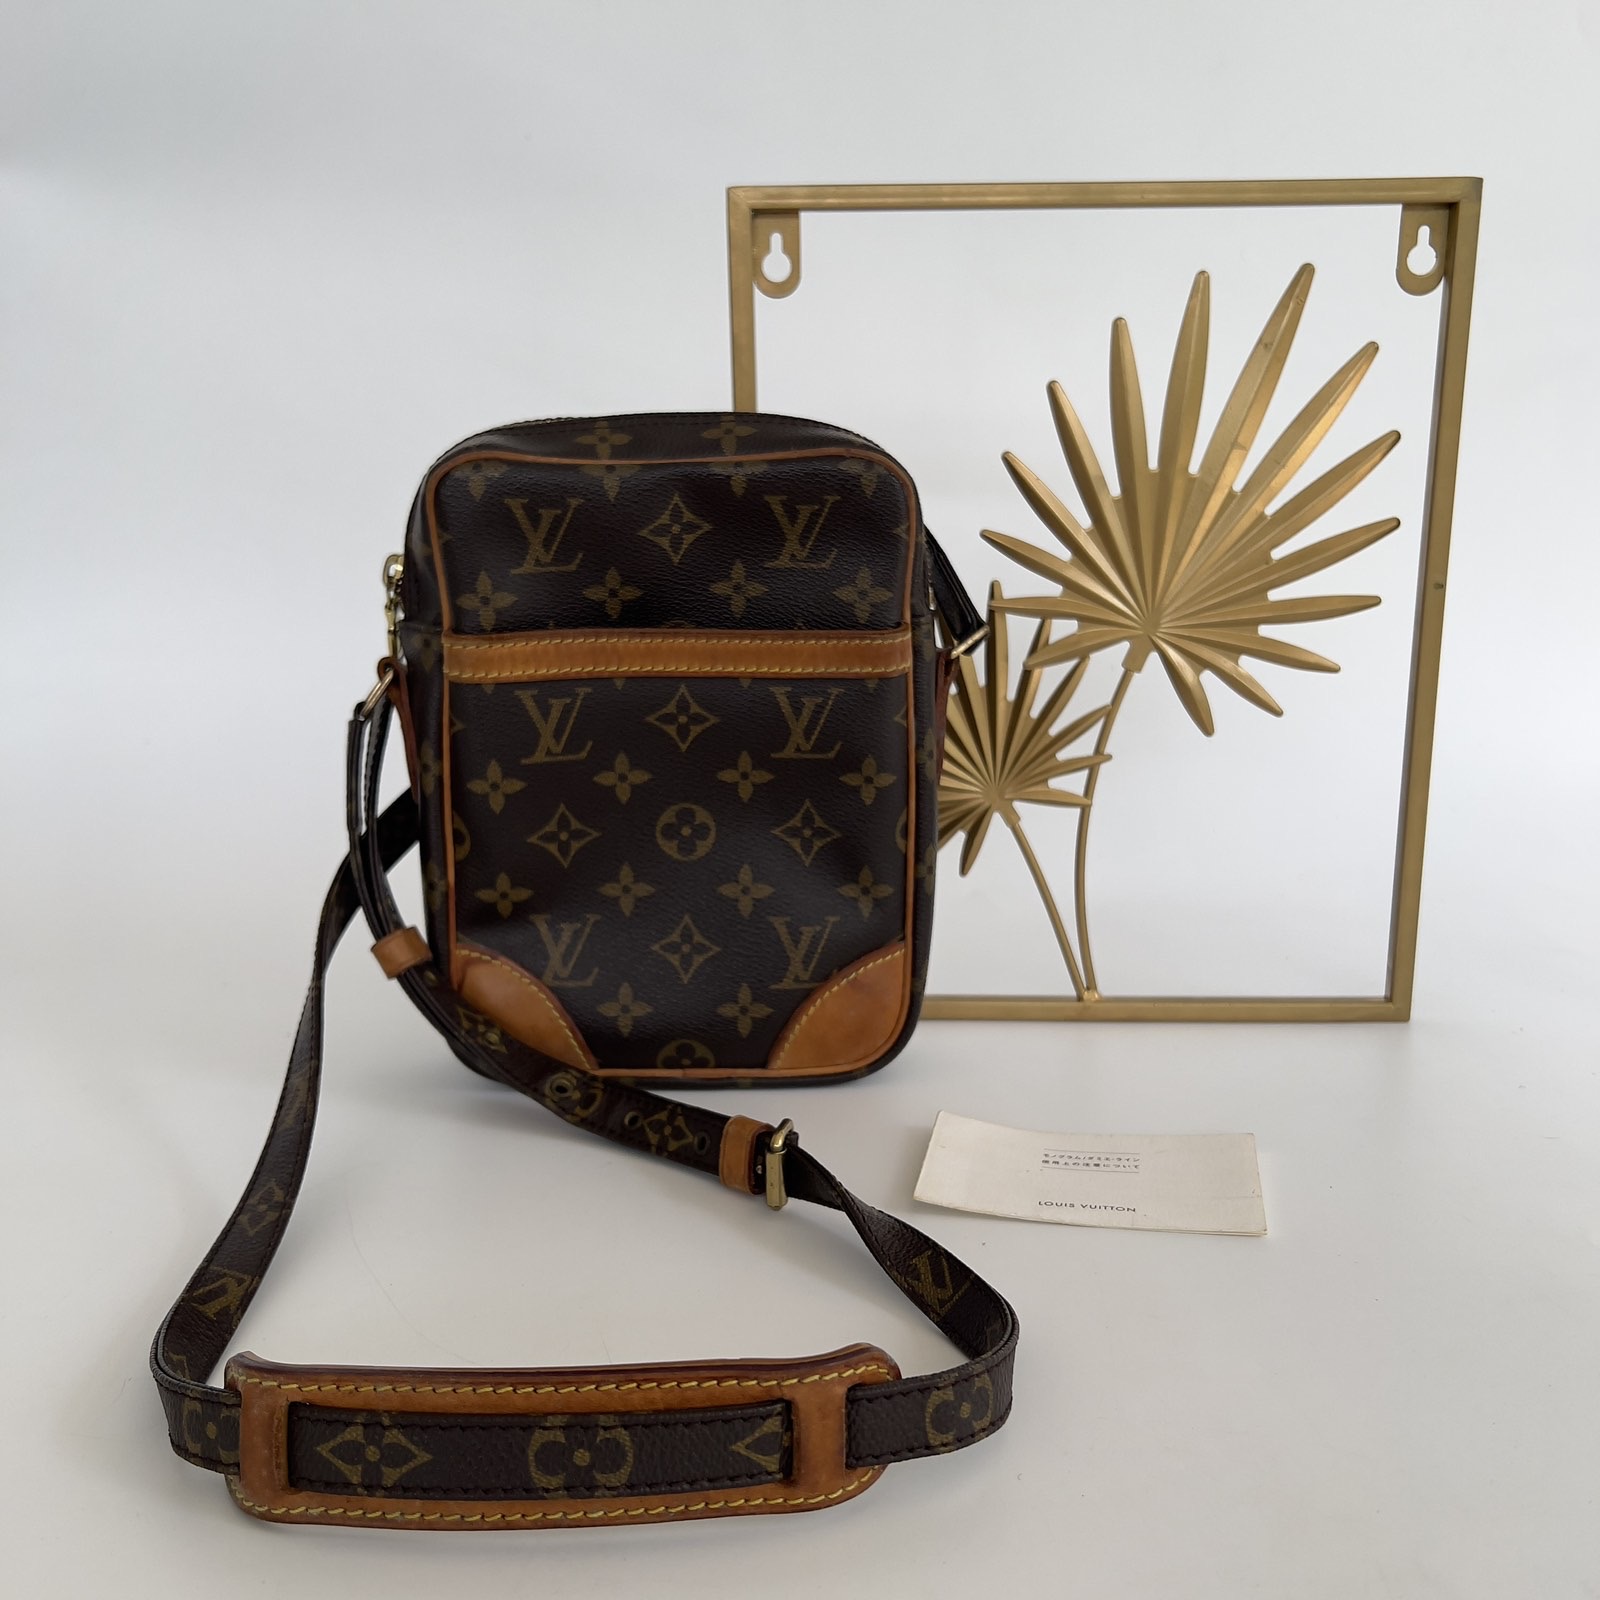 Louis Vuitton Monogram Canvas Delightful PM. Made in France. No